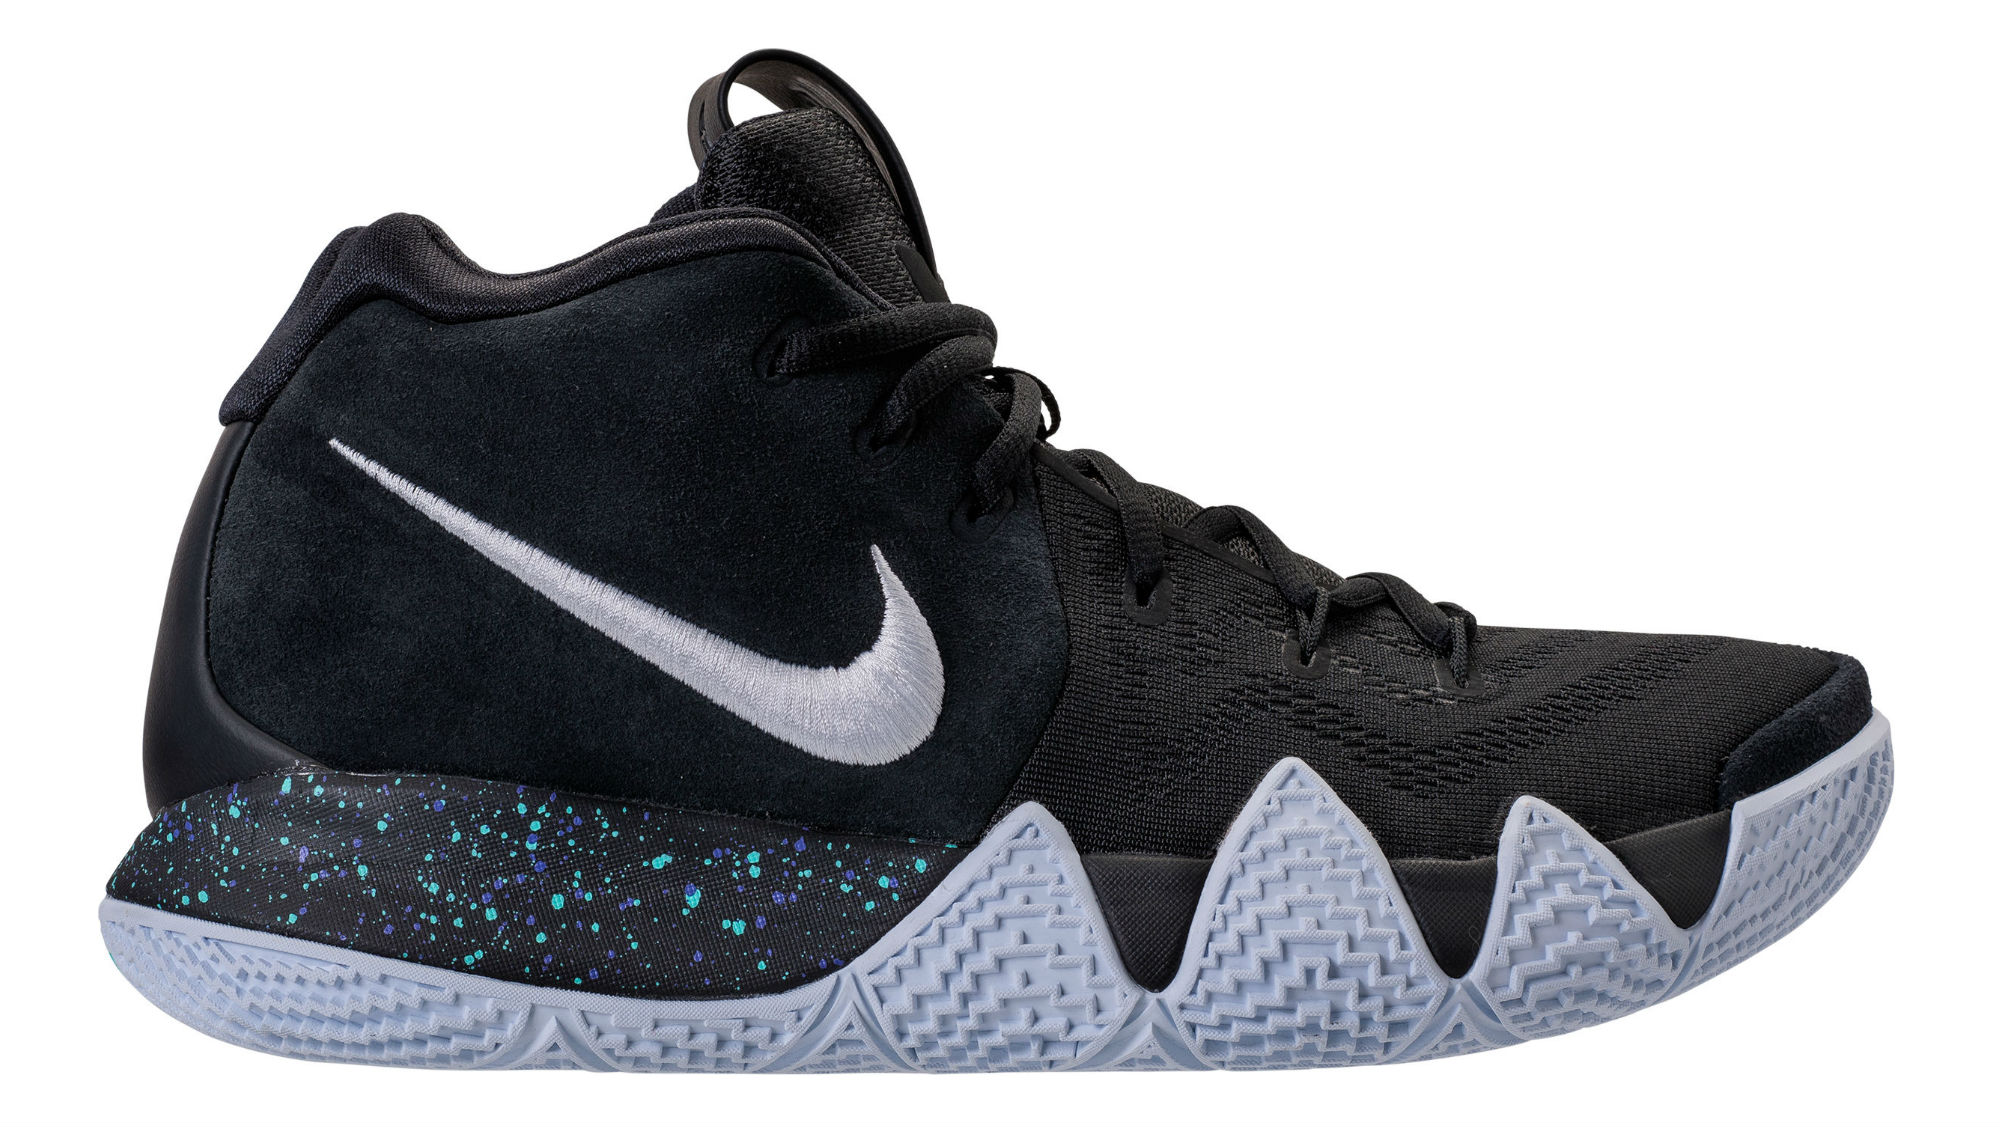 kyrie 4 colorways release date